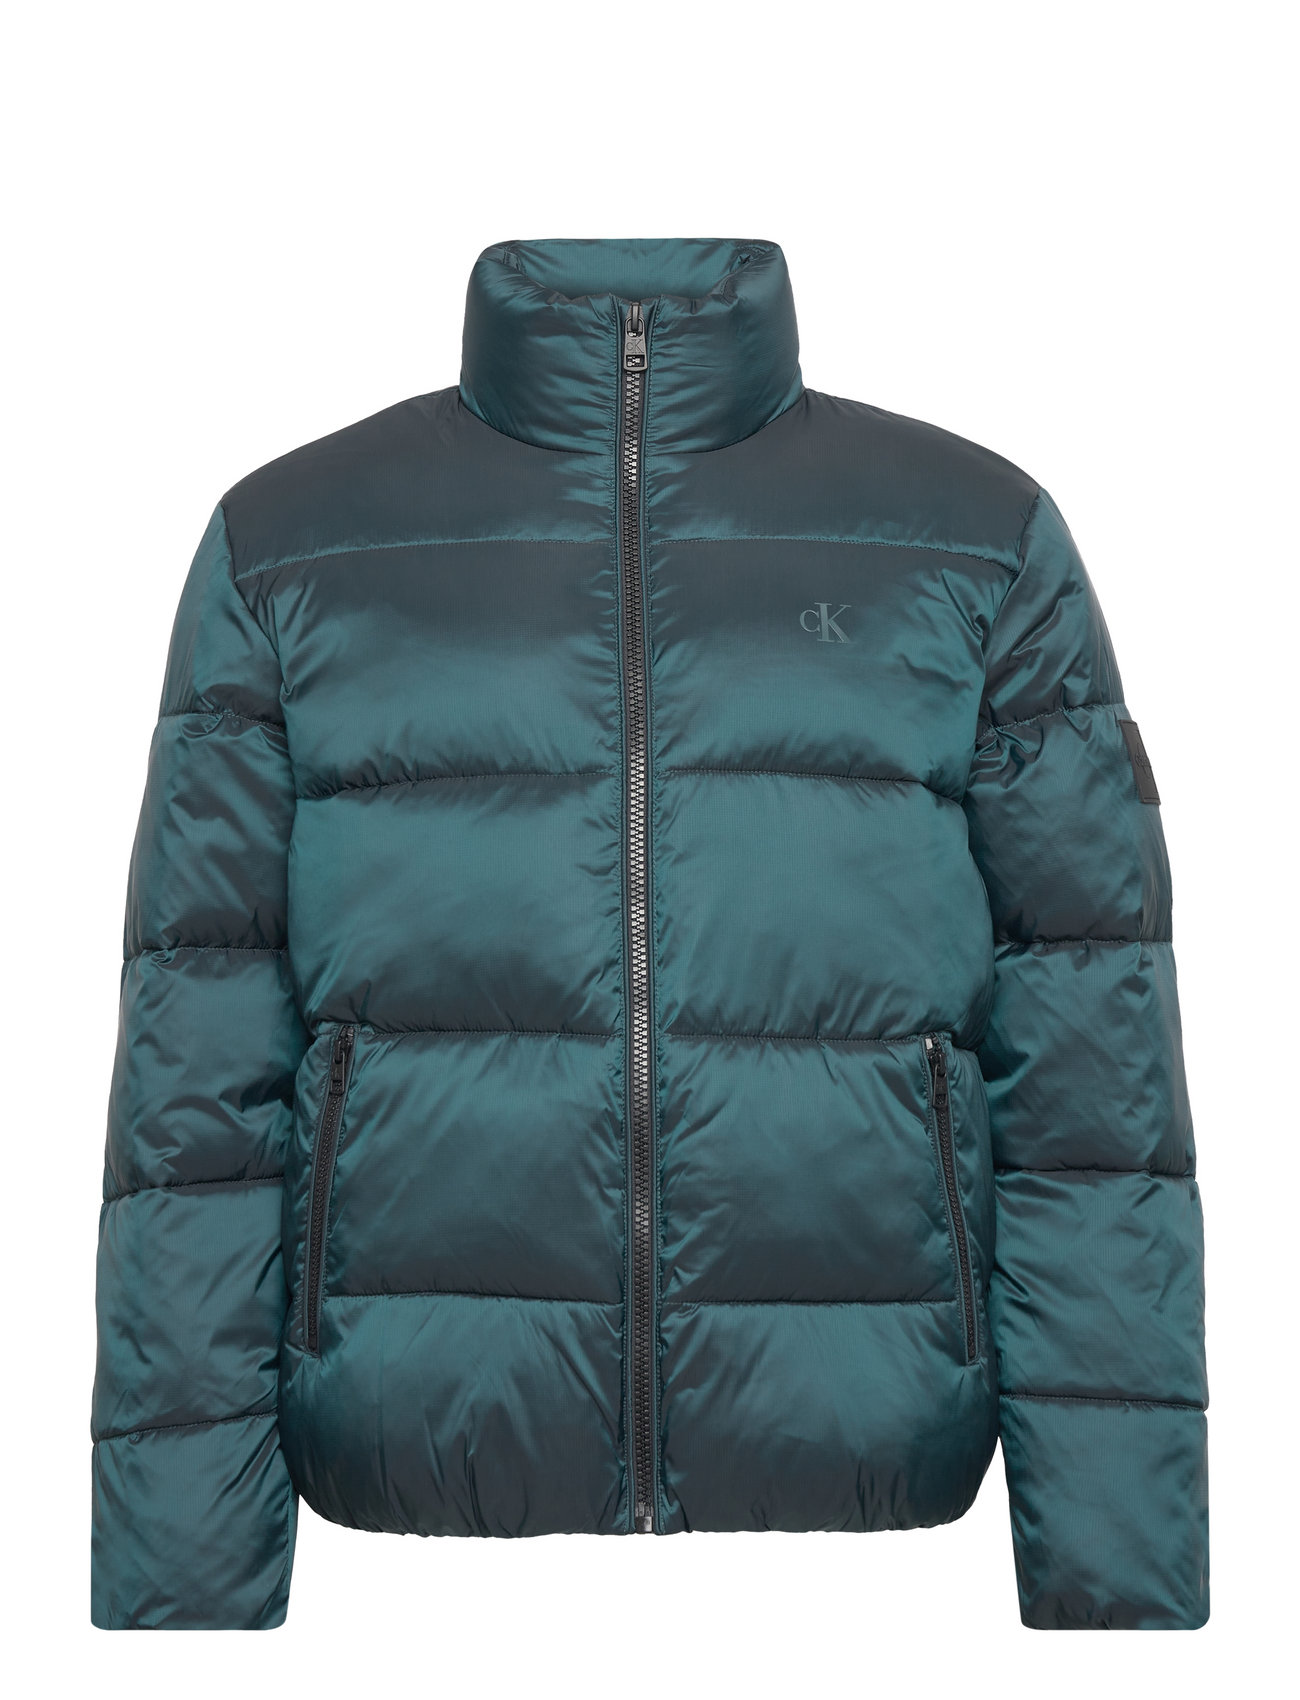 Calvin Klein Jeans Tt Ripstop Puffer Jacket - 149.44 €. Buy Padded jackets  from Calvin Klein Jeans online at . Fast delivery and easy returns